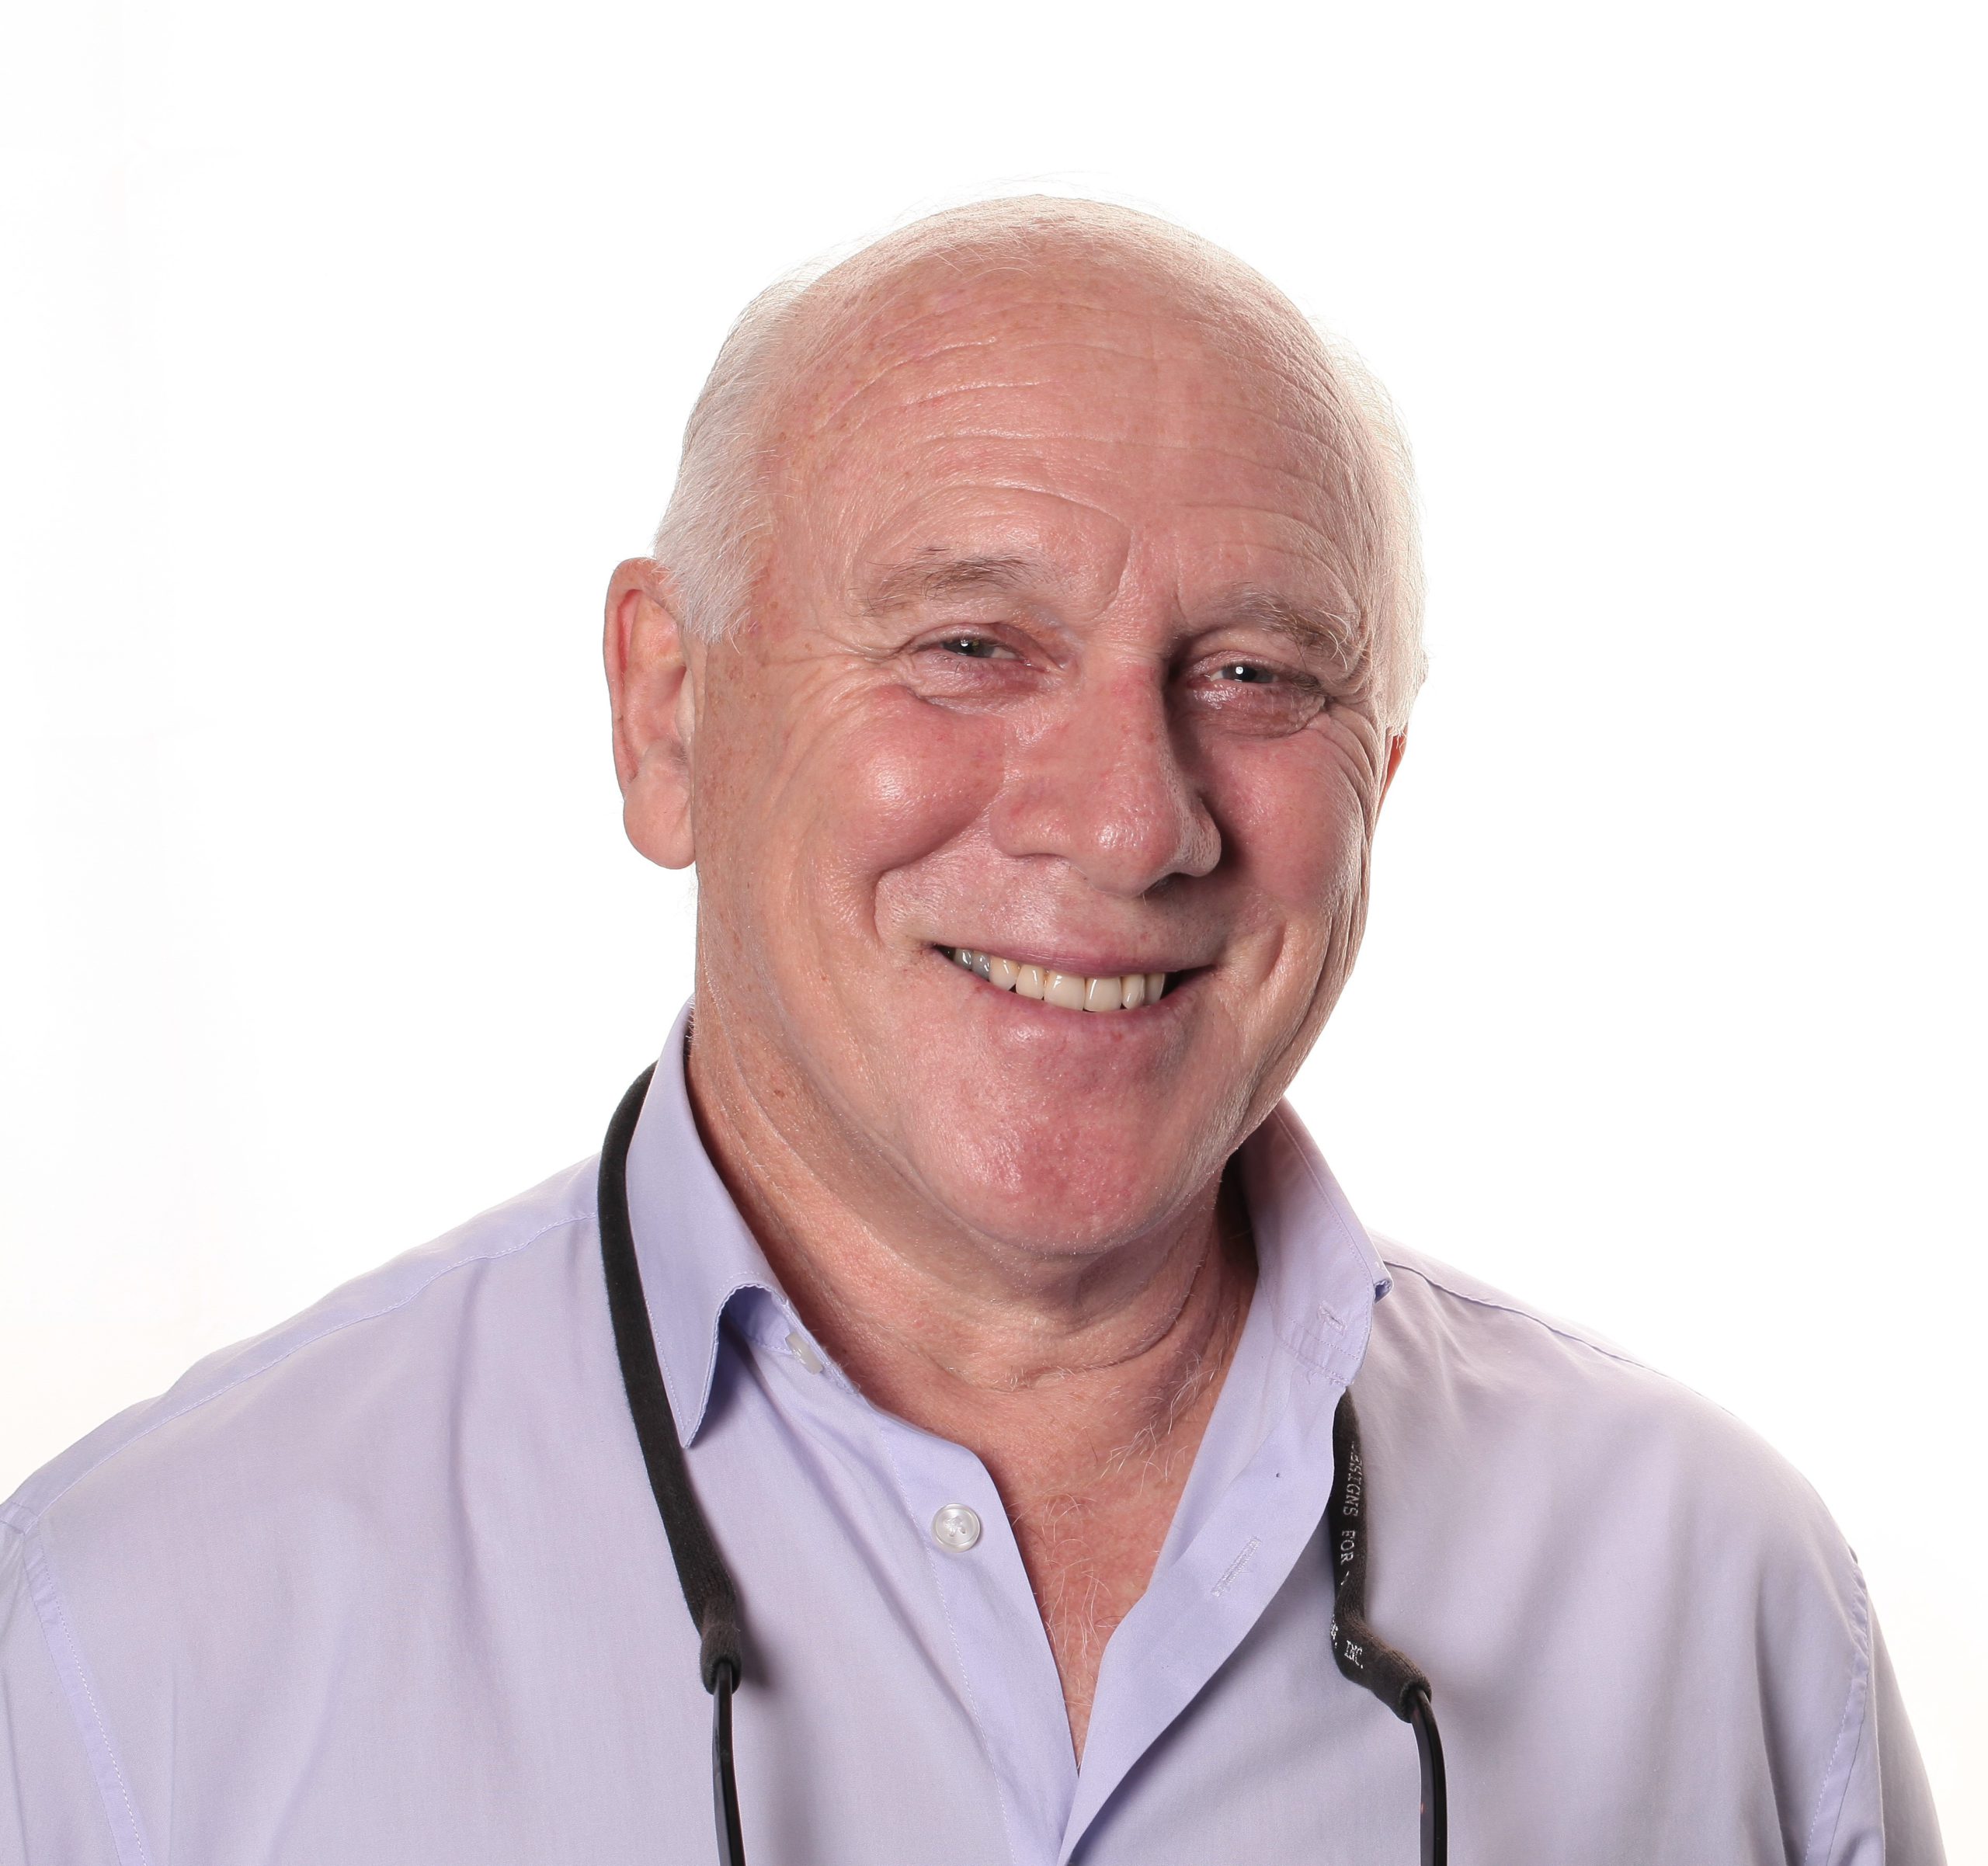 Dr Larry Benge (Dentist), Practice Principal and Founder  Bond Street Dental | Leading Authority in Cosmetic & Reconstructive Implant Dentistry, All On 4 and Zygoma Dental Implants in Australia